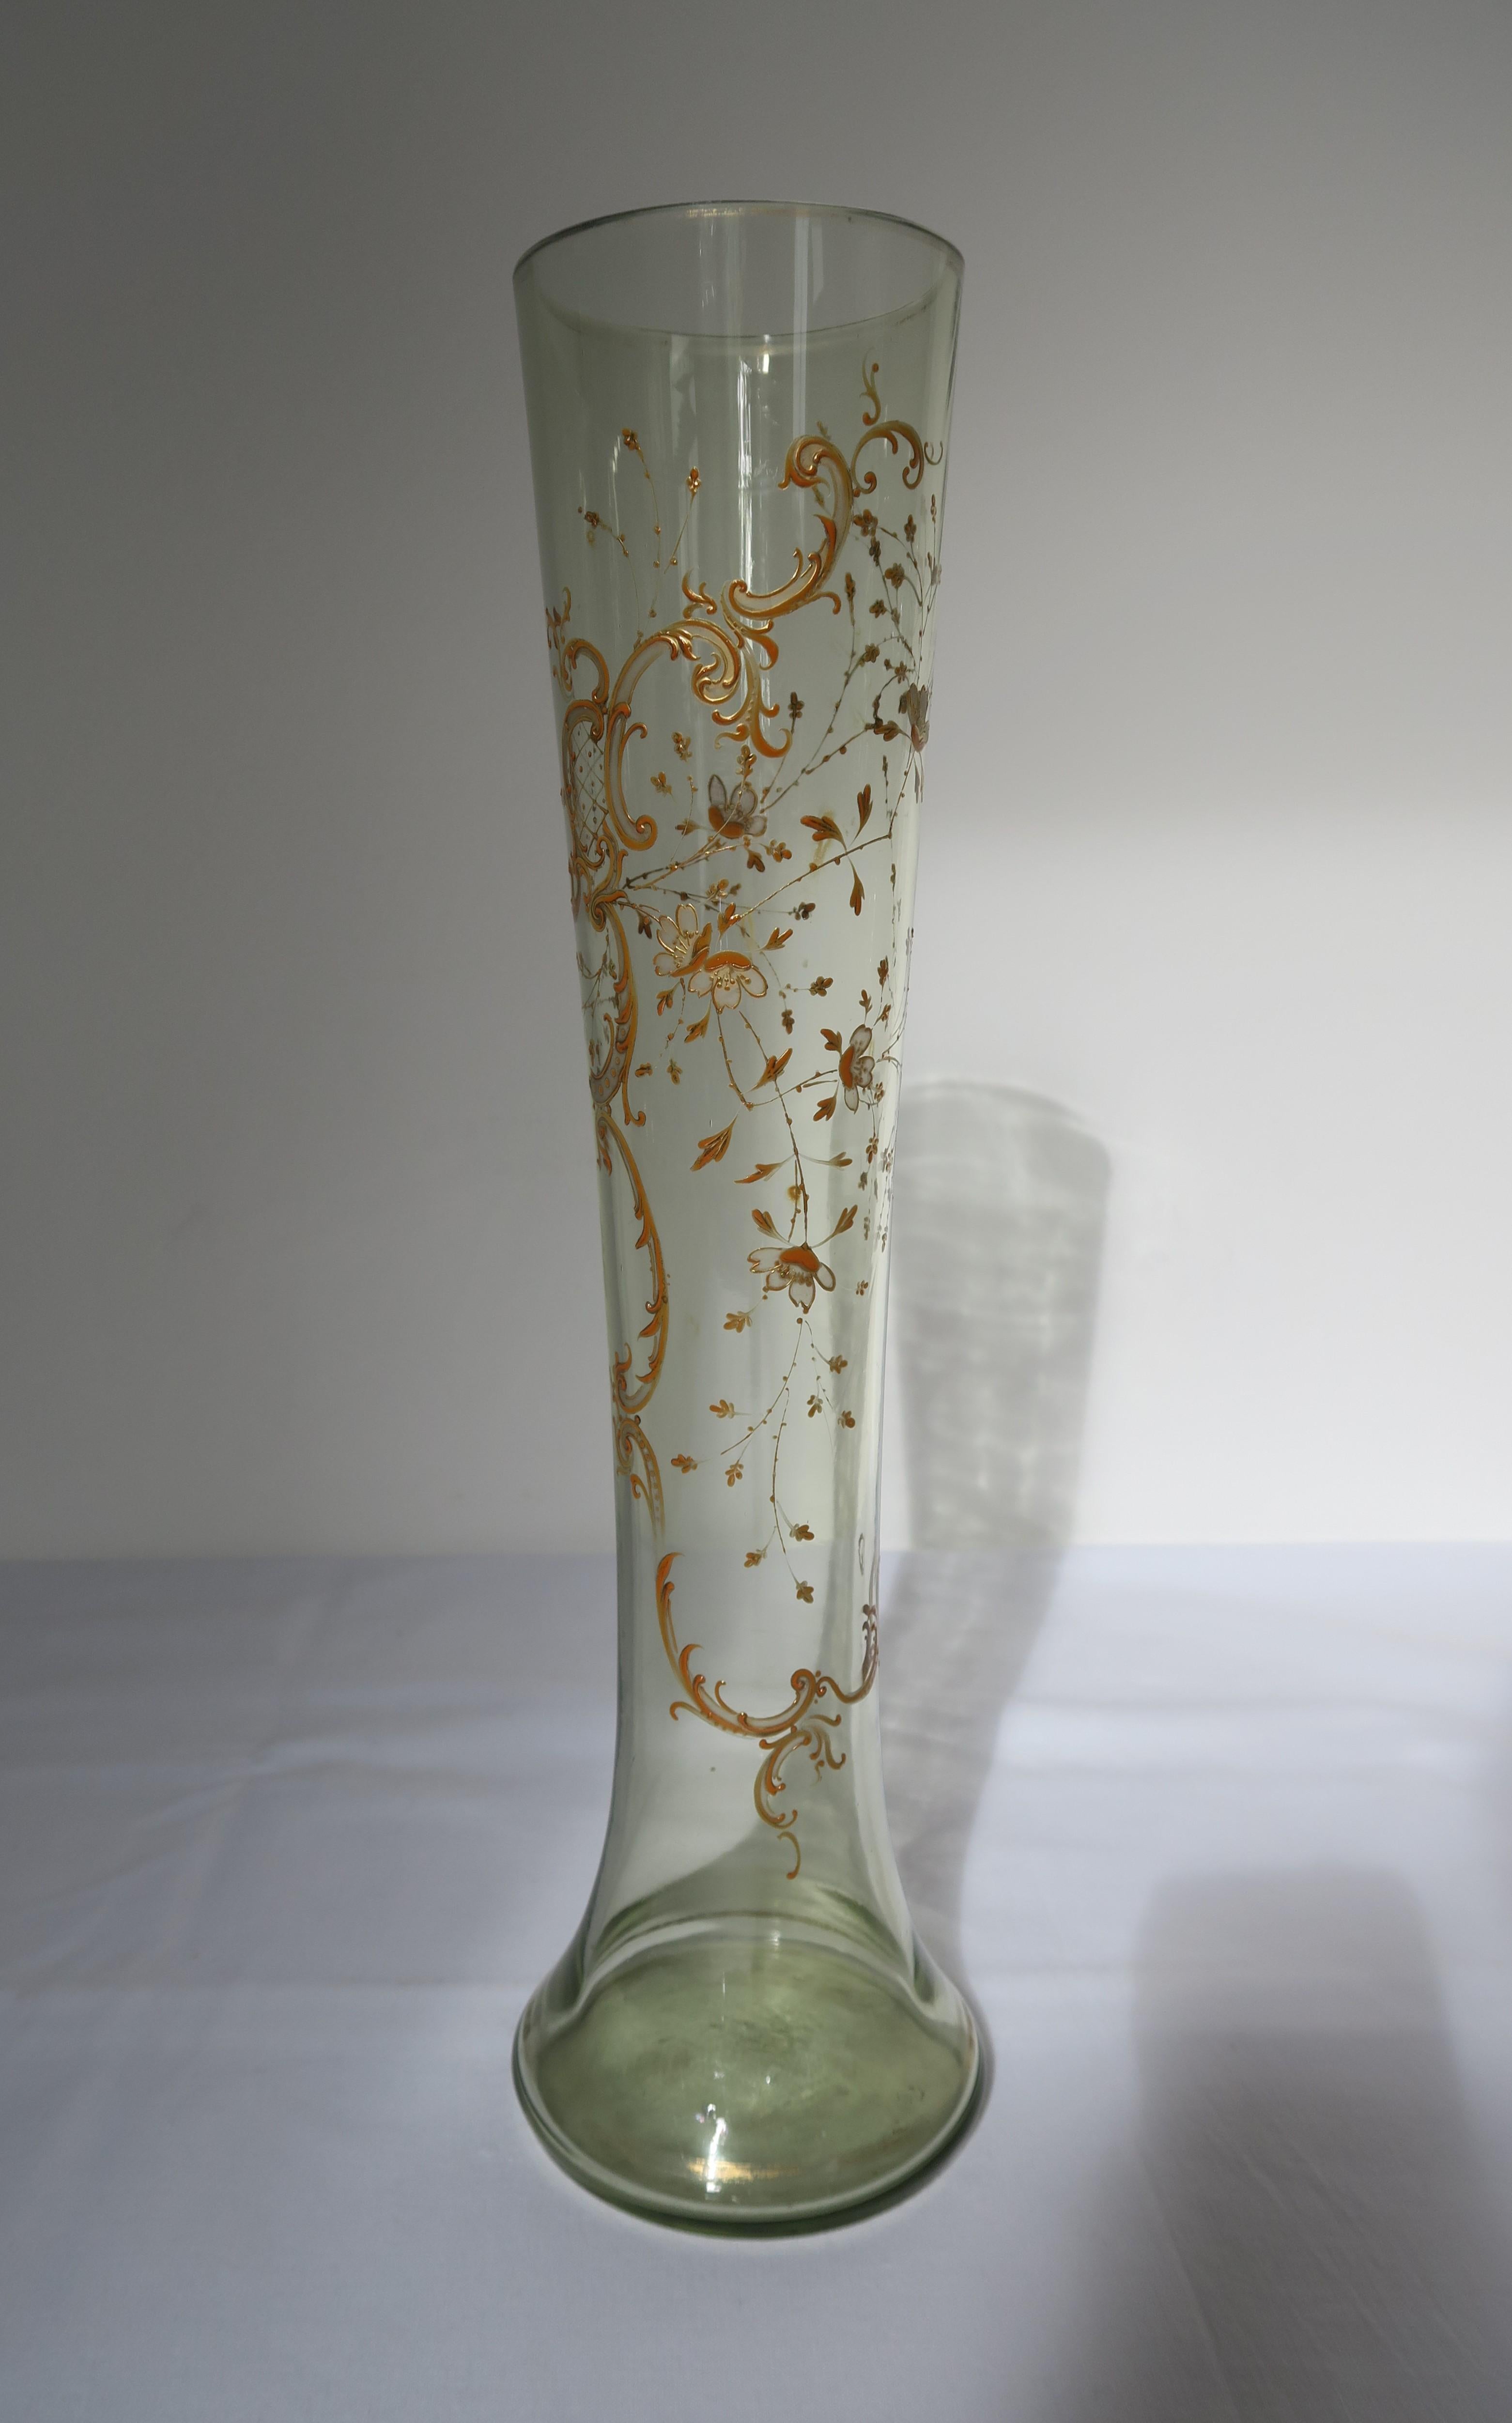 Original intricately hand-painted vase by Moser Glassworks from ca. 1910-1920. Designed by renowned Karlovy Vary based designer Ludwig Moser it features a gilded rim and base and beautiful cherry blossom and ornamental design. The crystal glass and